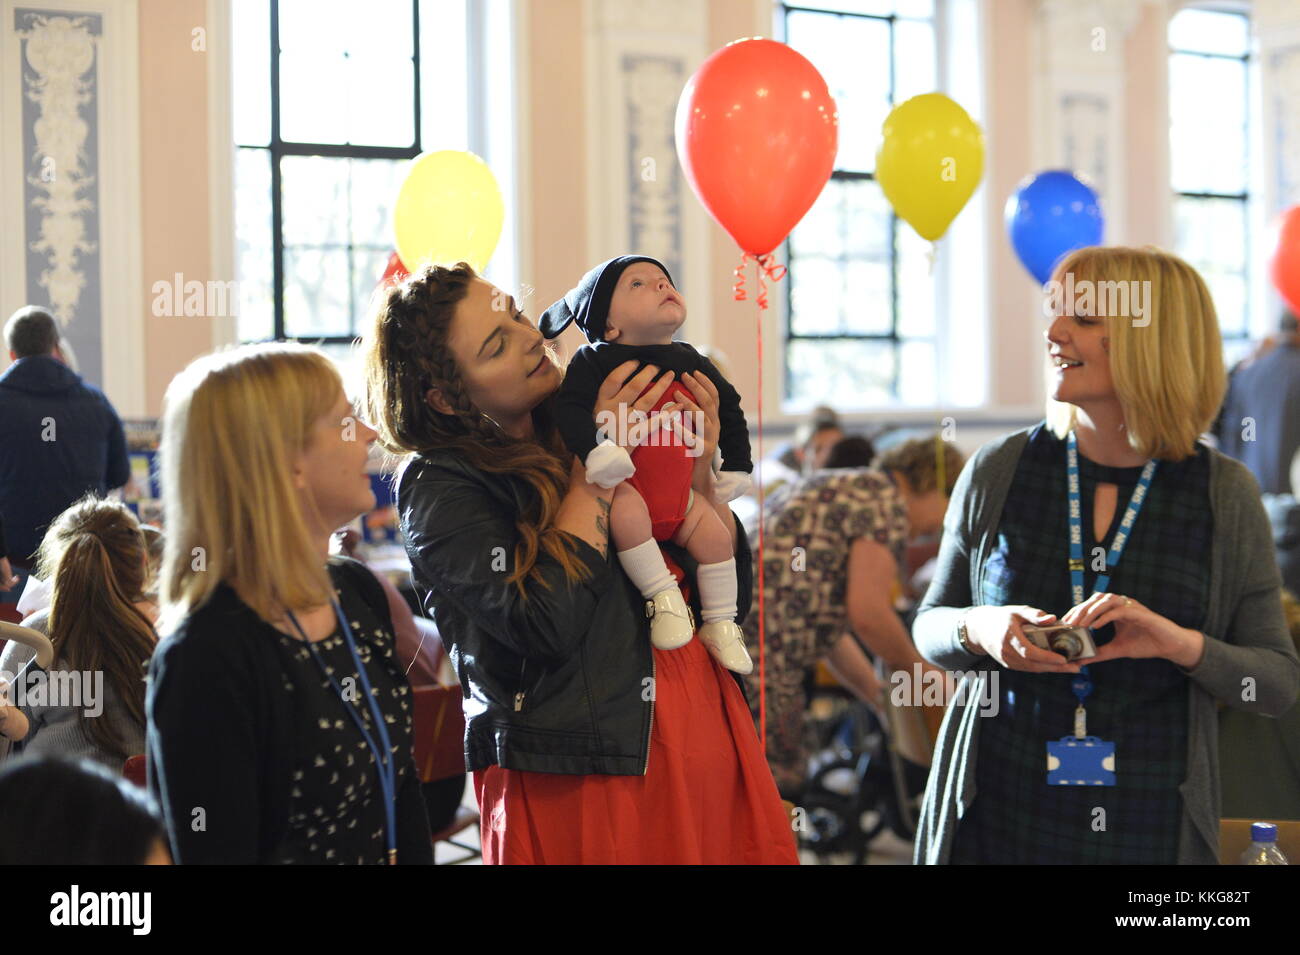 Scotland's First Minister Nicola Sturgeon attends a celebration event to celebrate NHS Tayside having supported more than 1,000 women through Family Nurse Partnership programme at the Caird Hall in Dundee.  Featuring: Atmosphere Where: Dundee, Scotland, United Kingdom When: 30 Oct 2017 Credit: Euan Cherry/WENN.com Stock Photo